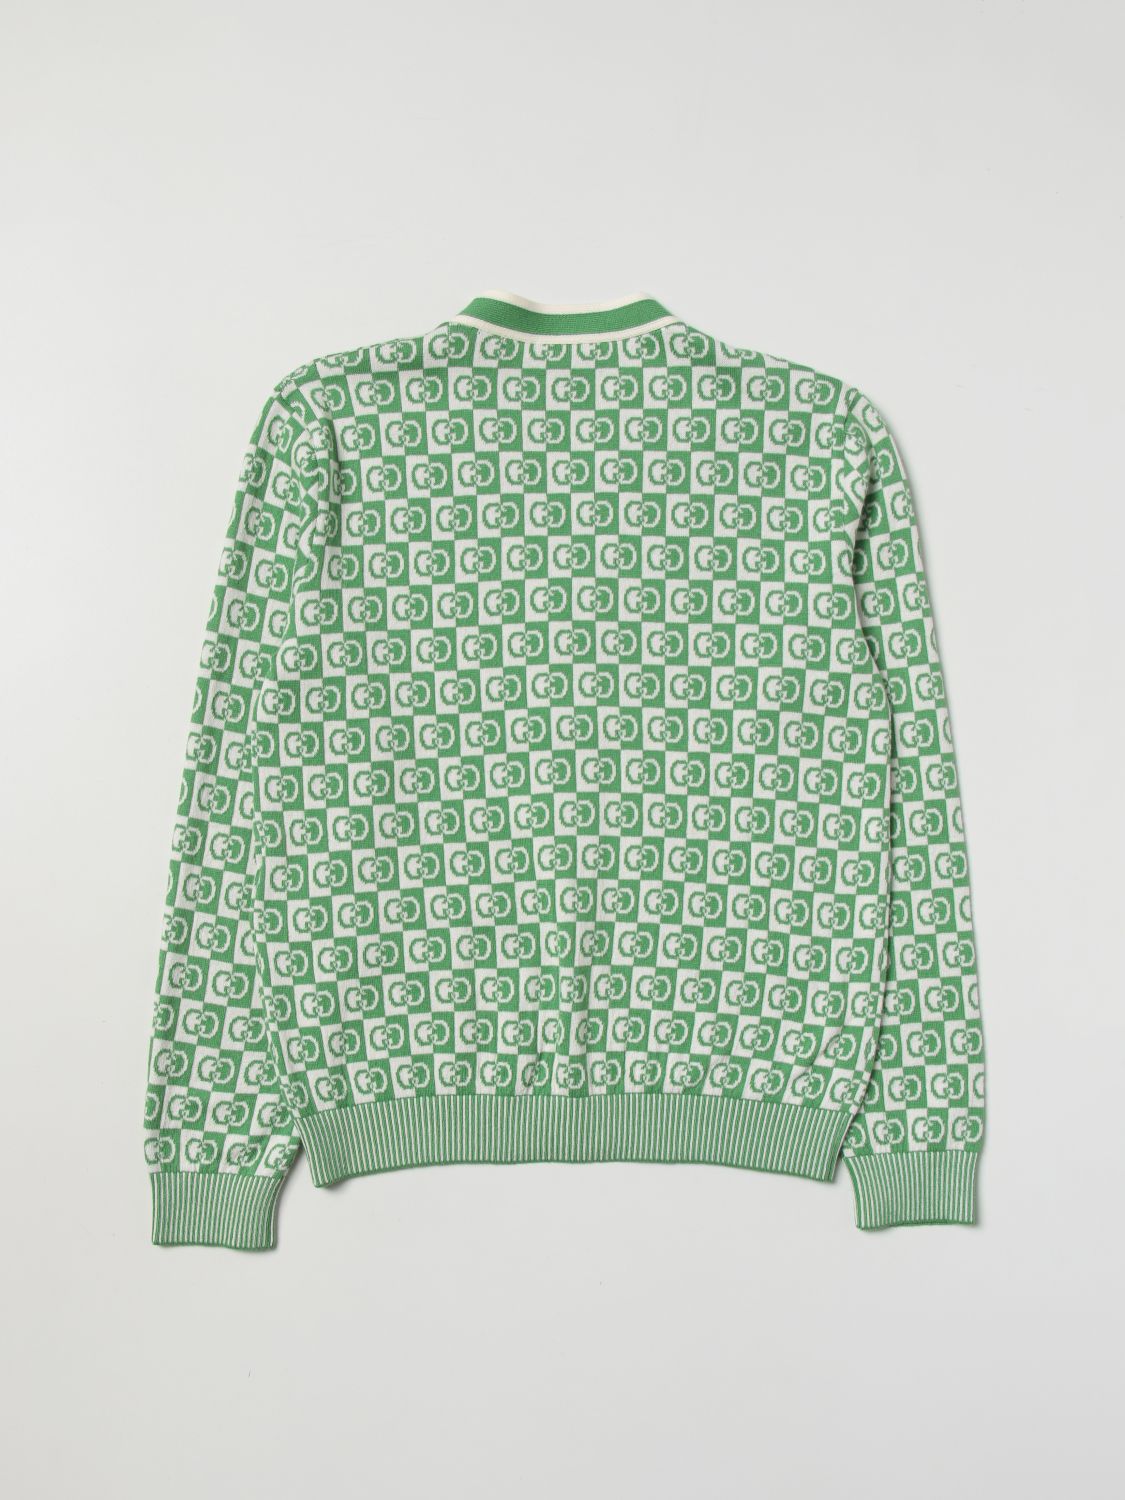 Rot varkensvlees Actief GUCCI: sweater for boys - Blue | Gucci sweater 714506XKCRX online on  GIGLIO.COM